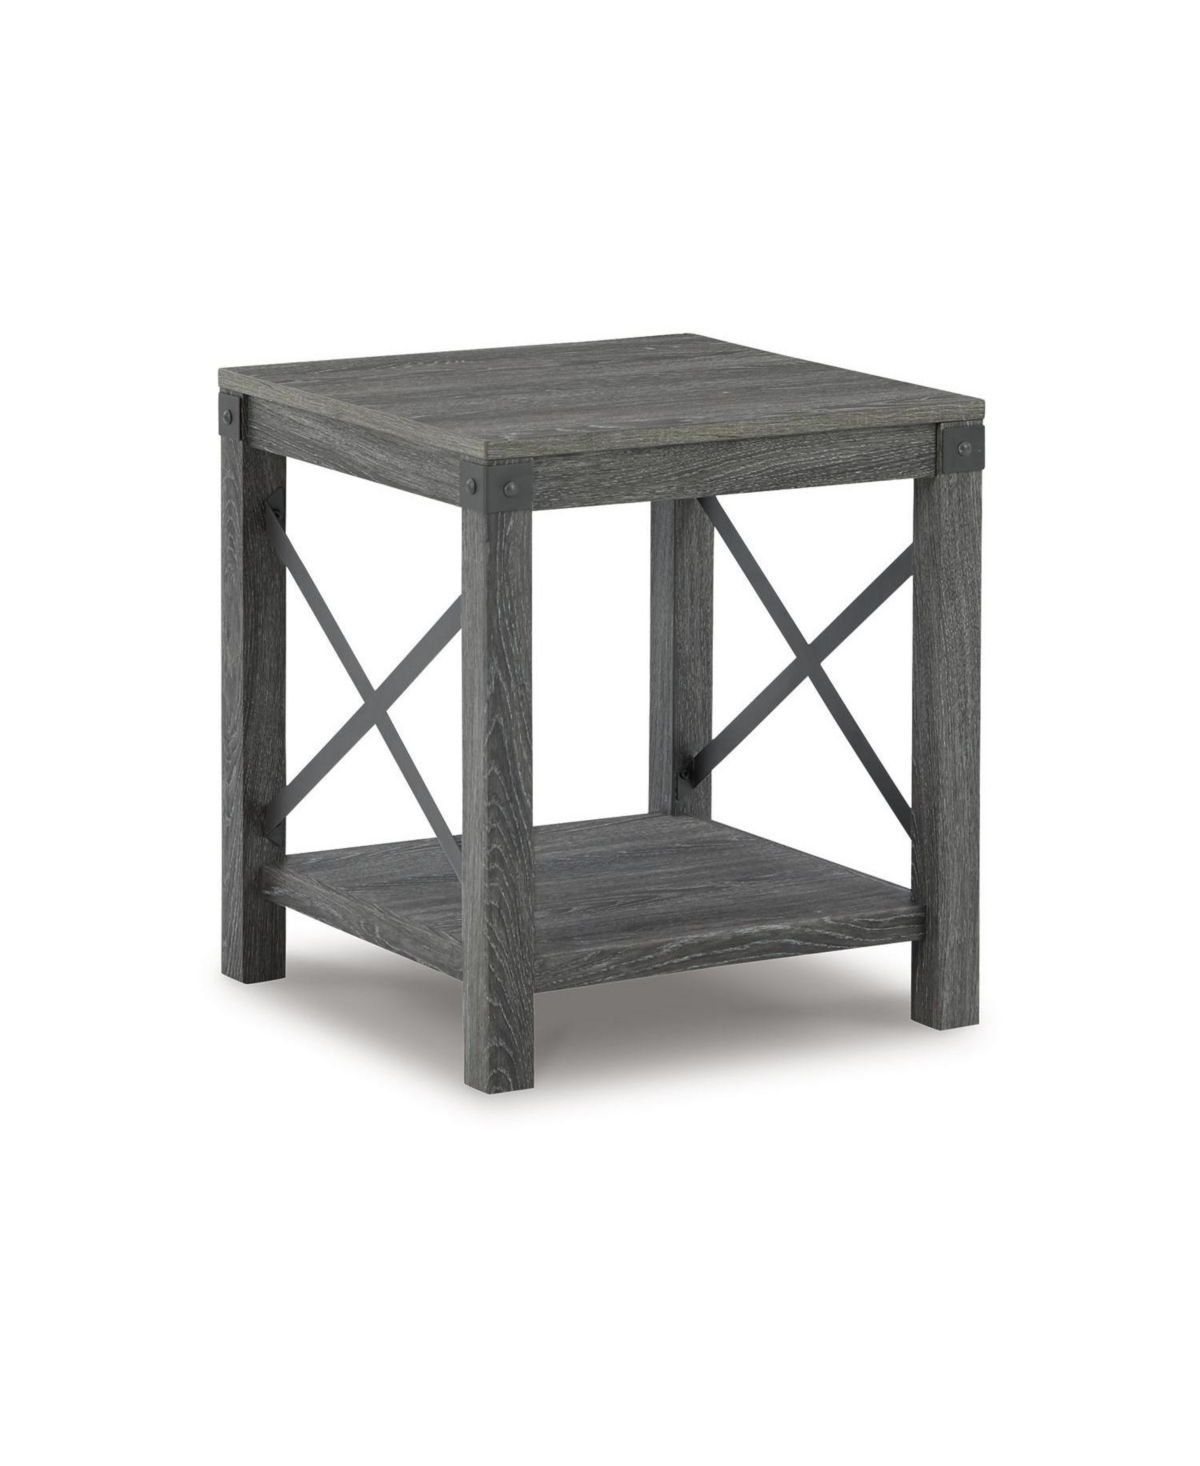 Signature Design By Ashley Freedan Square End Table In Grayish Brown